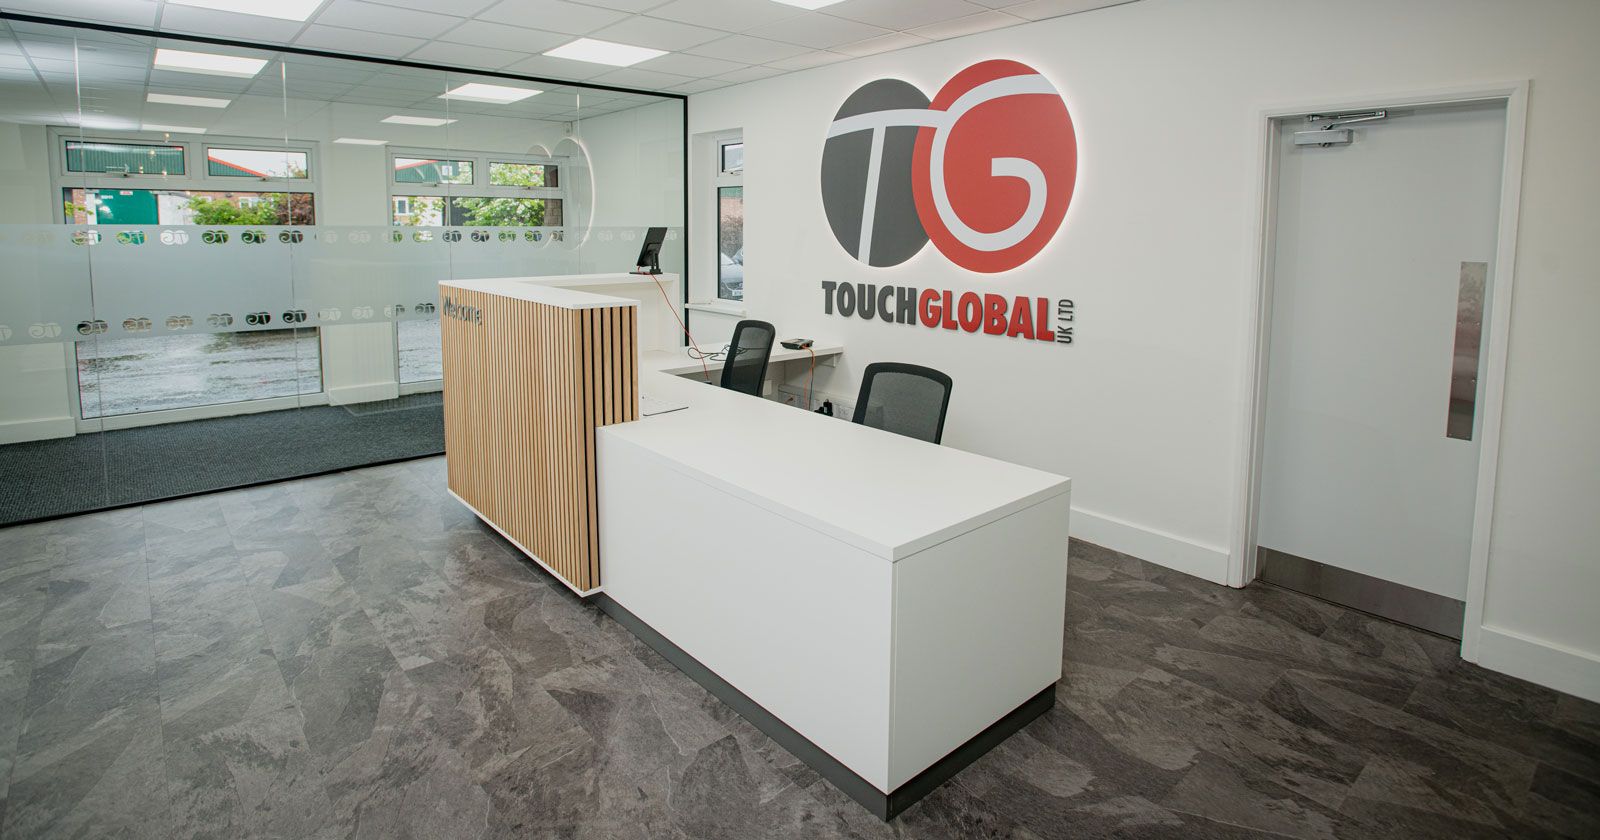 Touch Global Bespoke Reception Desk Design and Installed by APSS Joinery